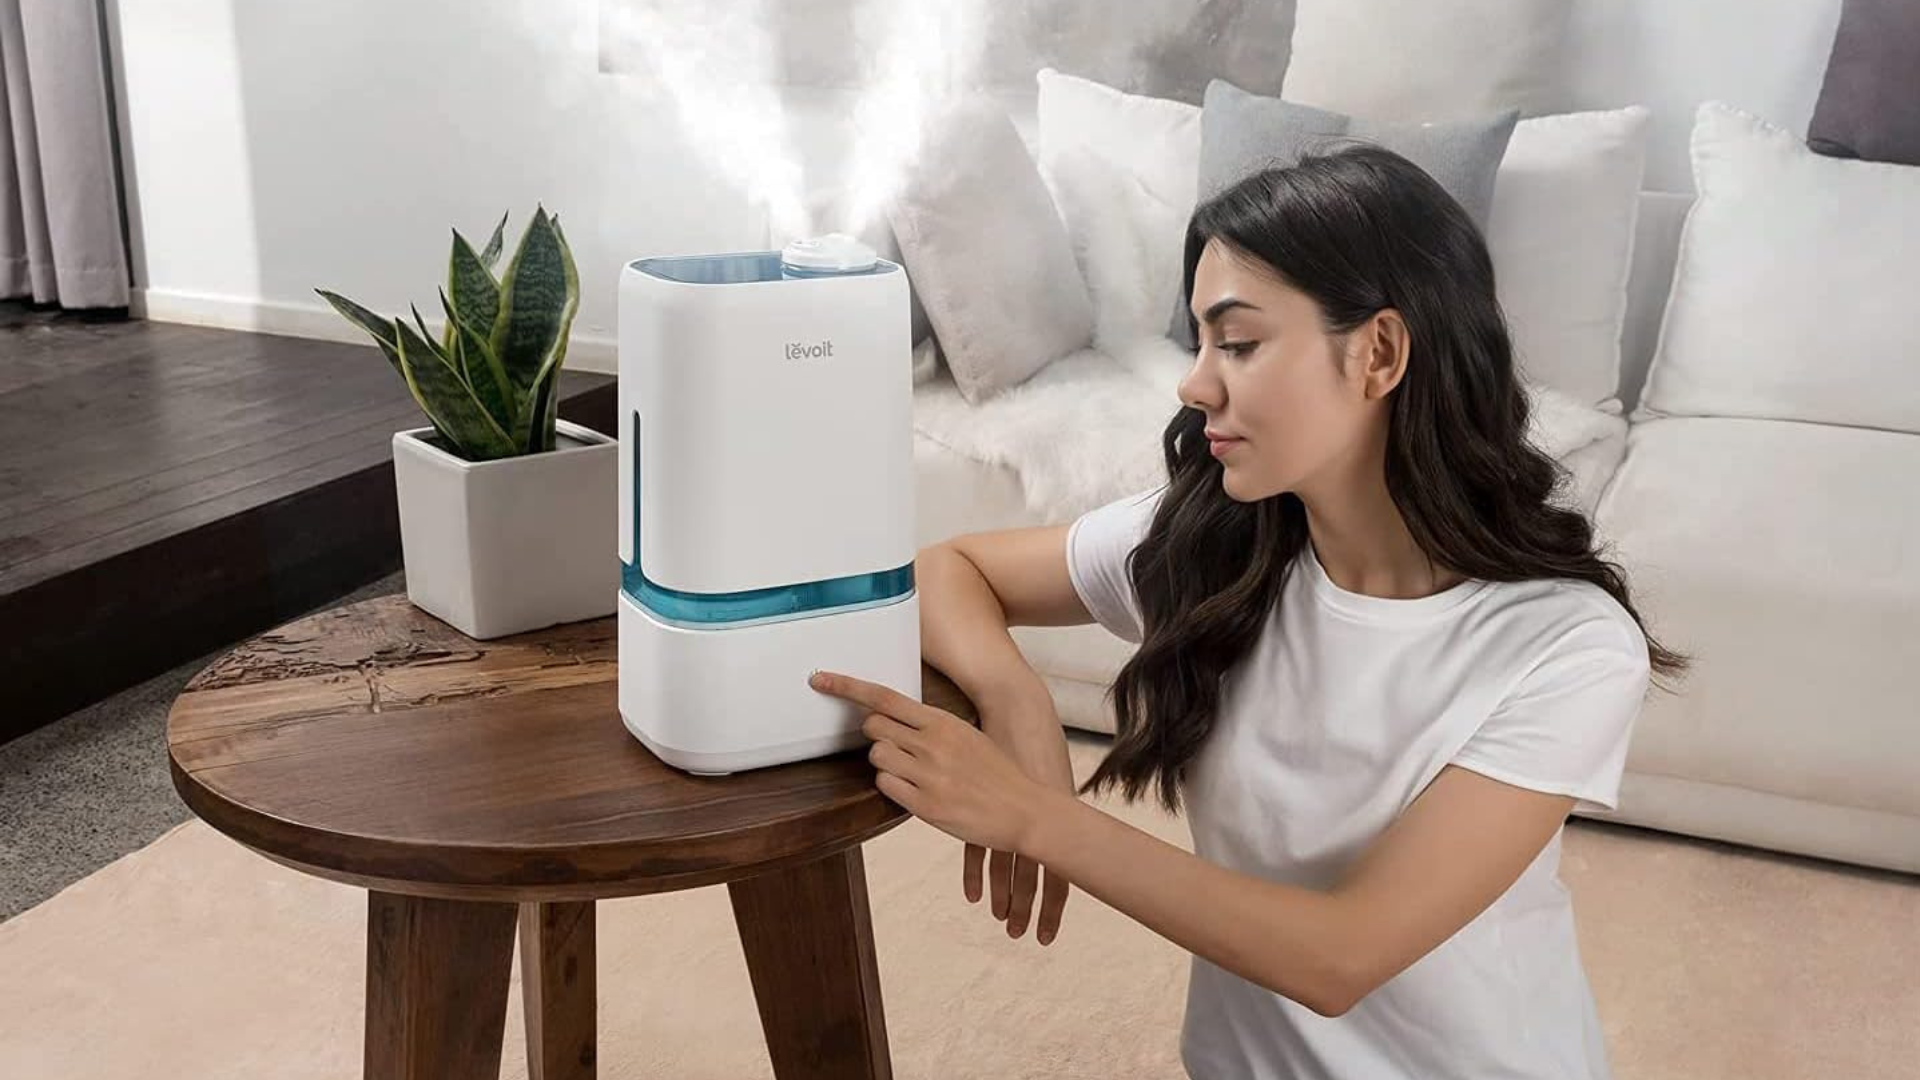 This Levoit Humidifier Has Over 20,000 5-Star Reviews, And For Good Reason